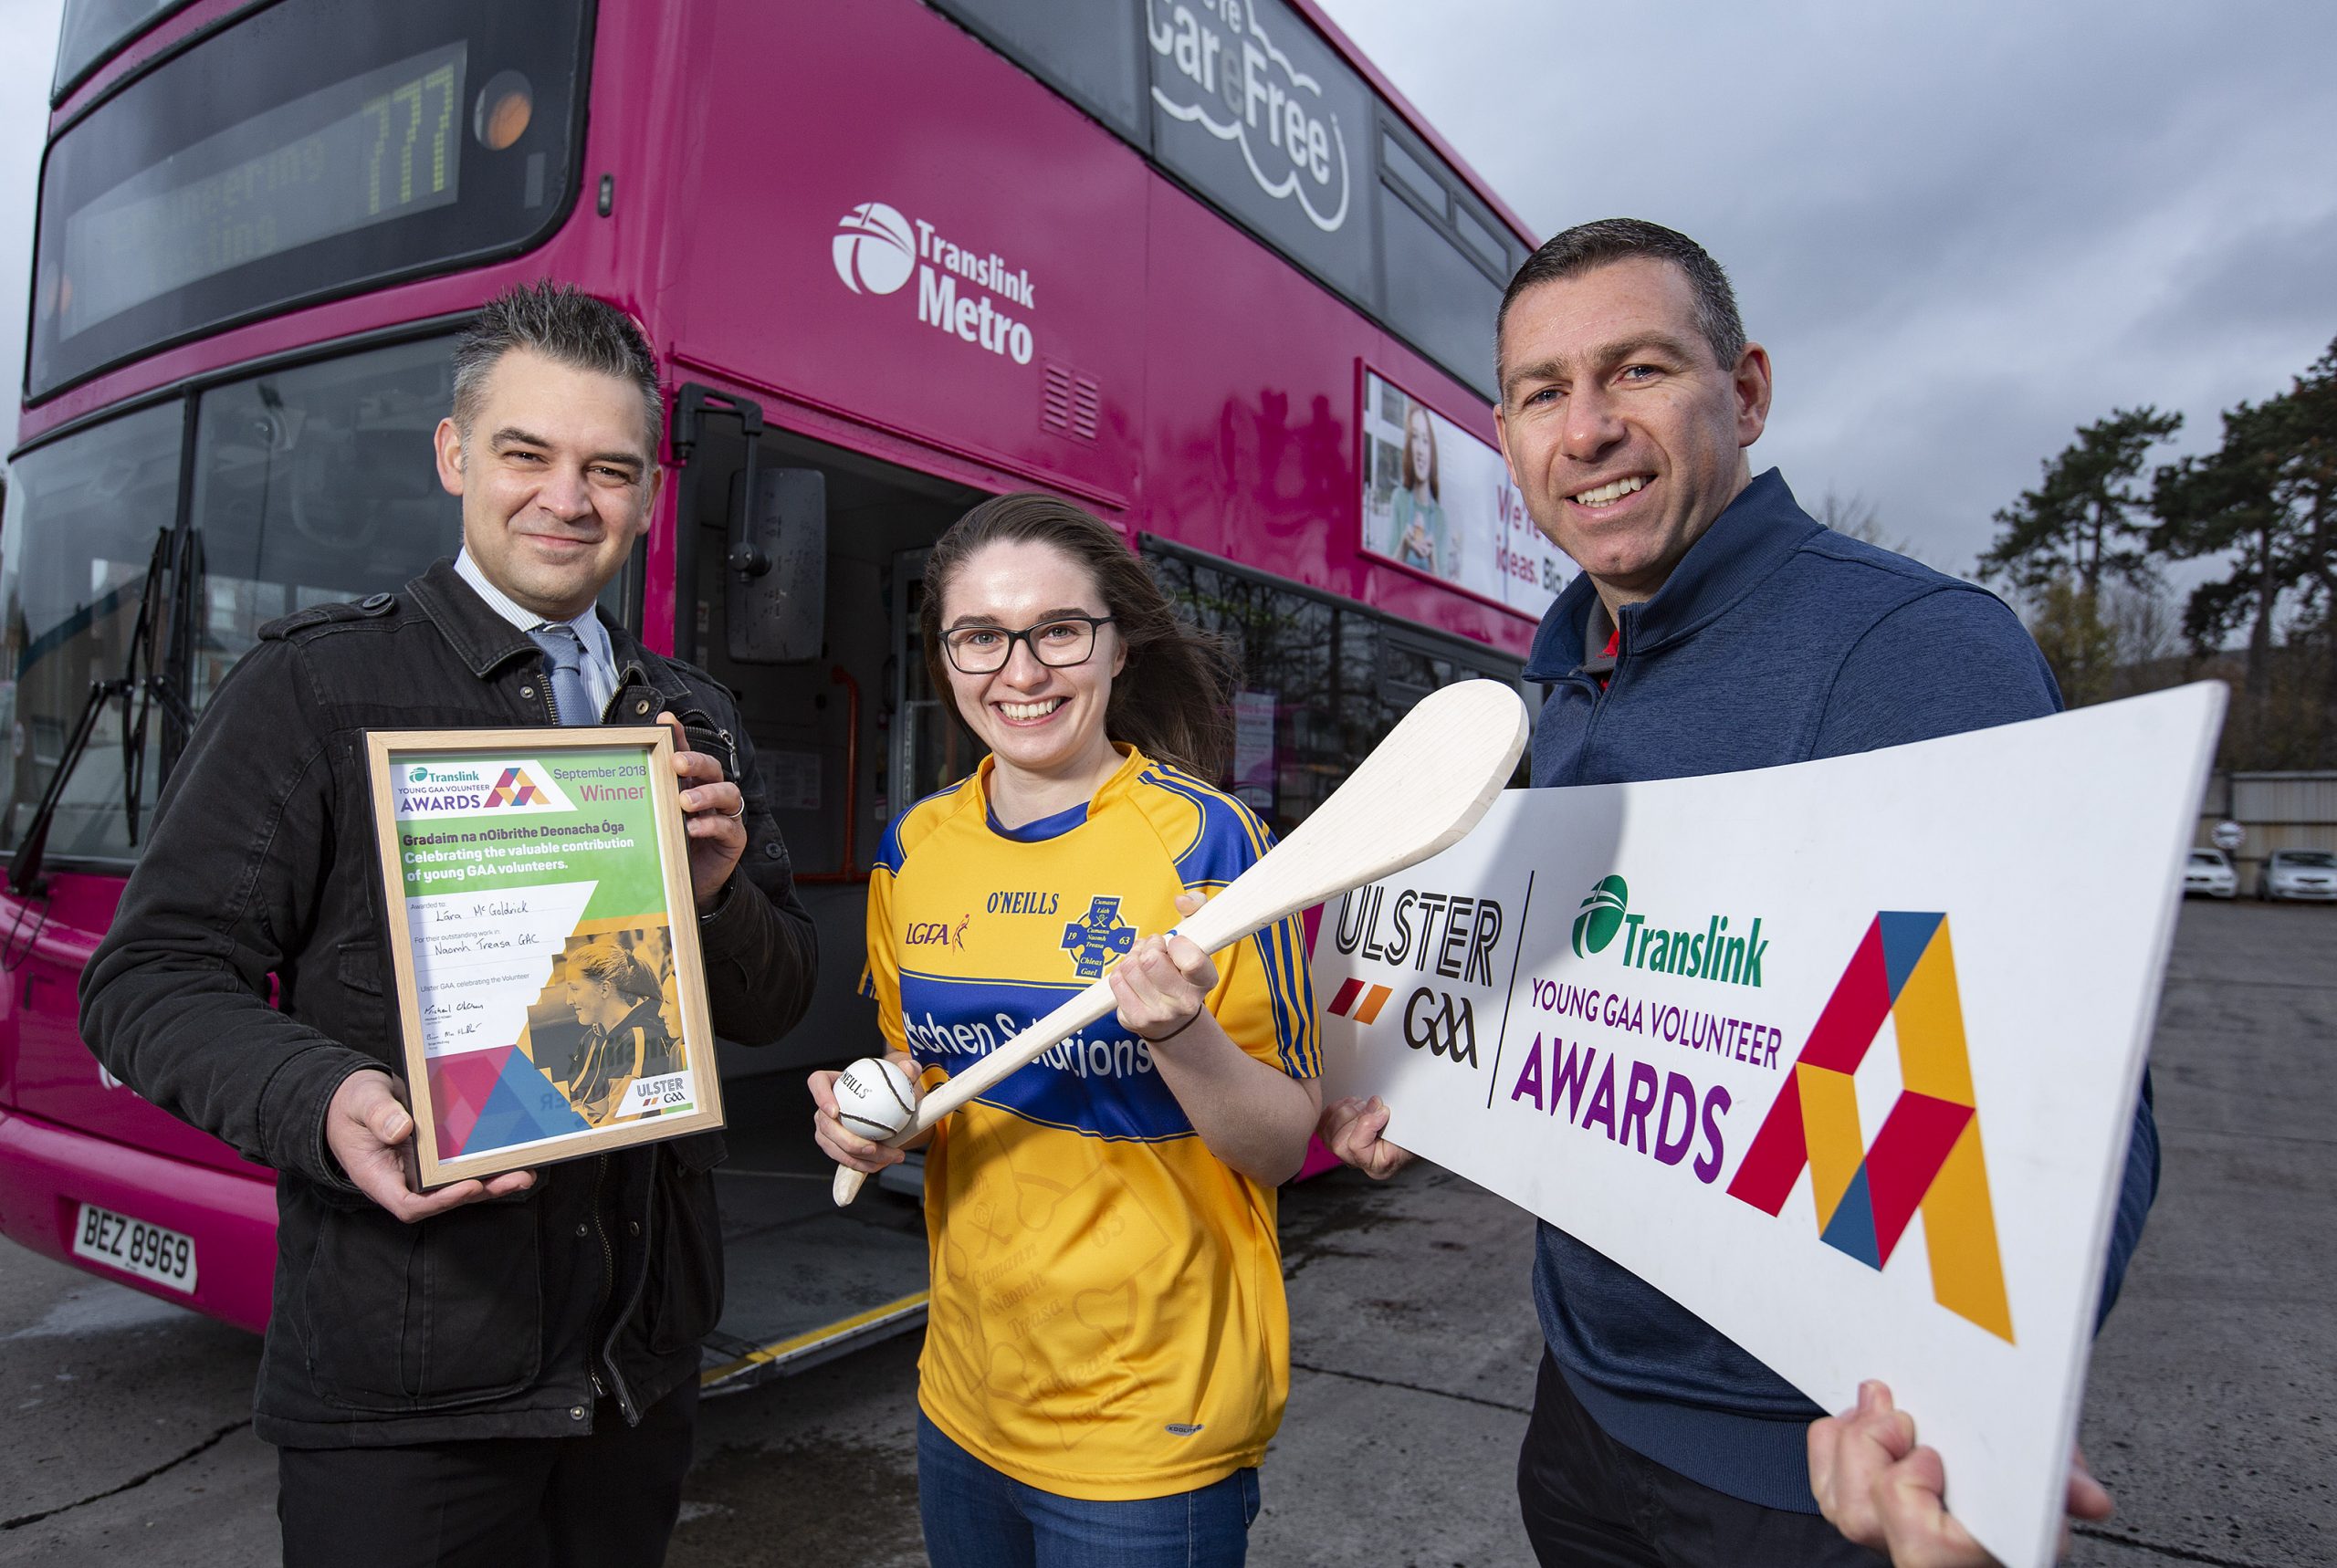 Lára is the Translink Young Volunteer of the Month